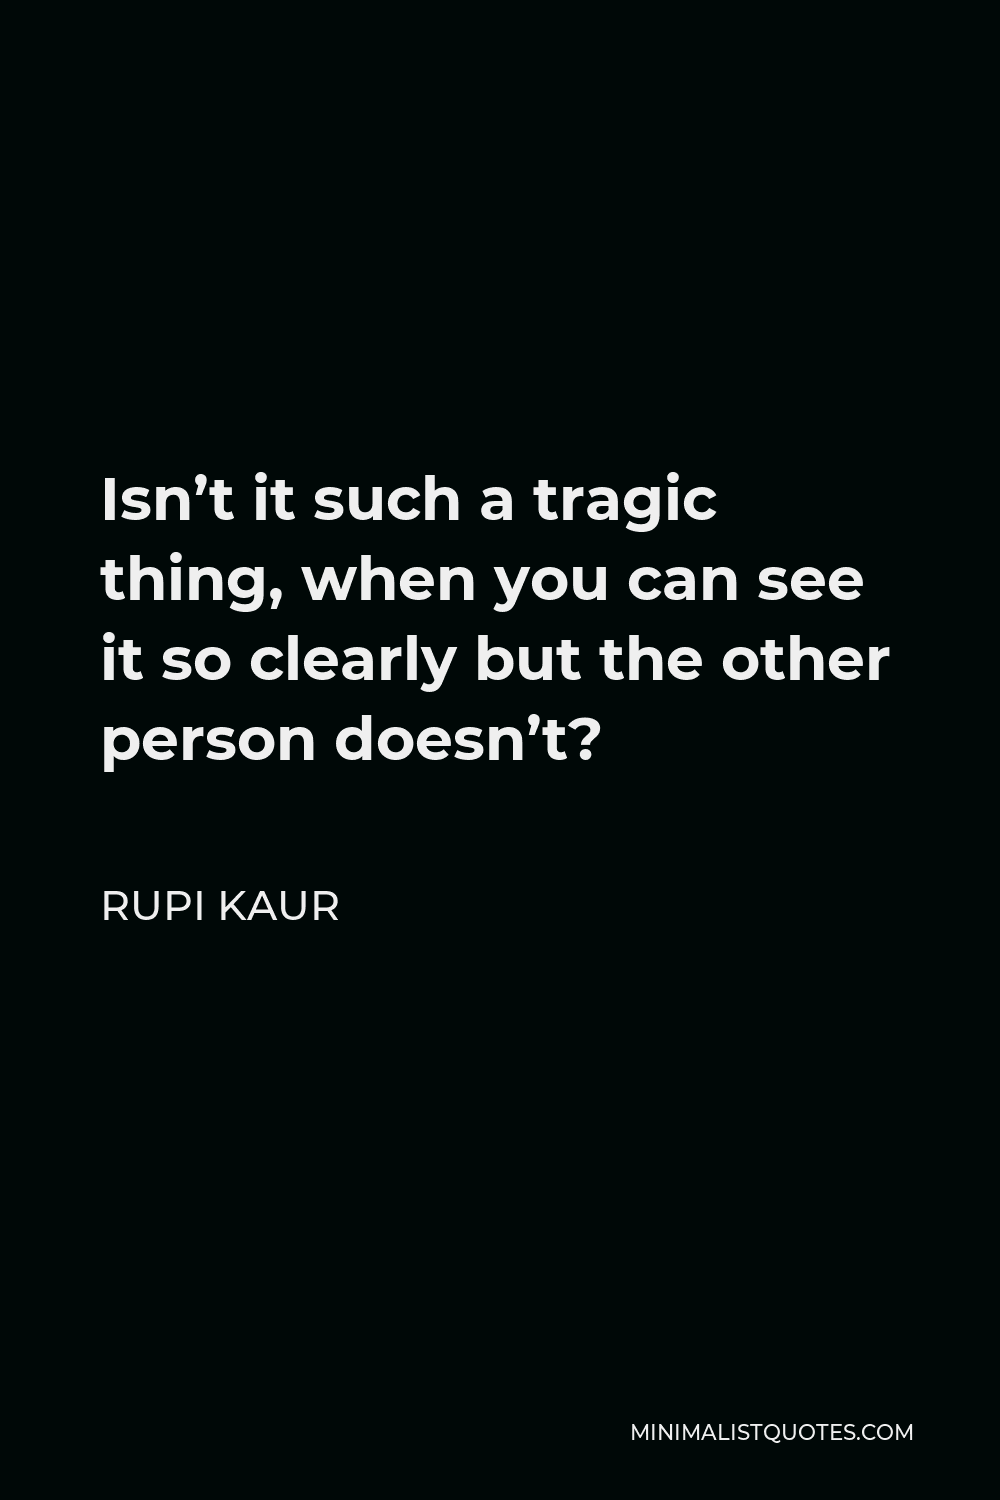 Rupi Kaur Quote - Isn’t it such a tragic thing, when you can see it so clearly but the other person doesn’t?